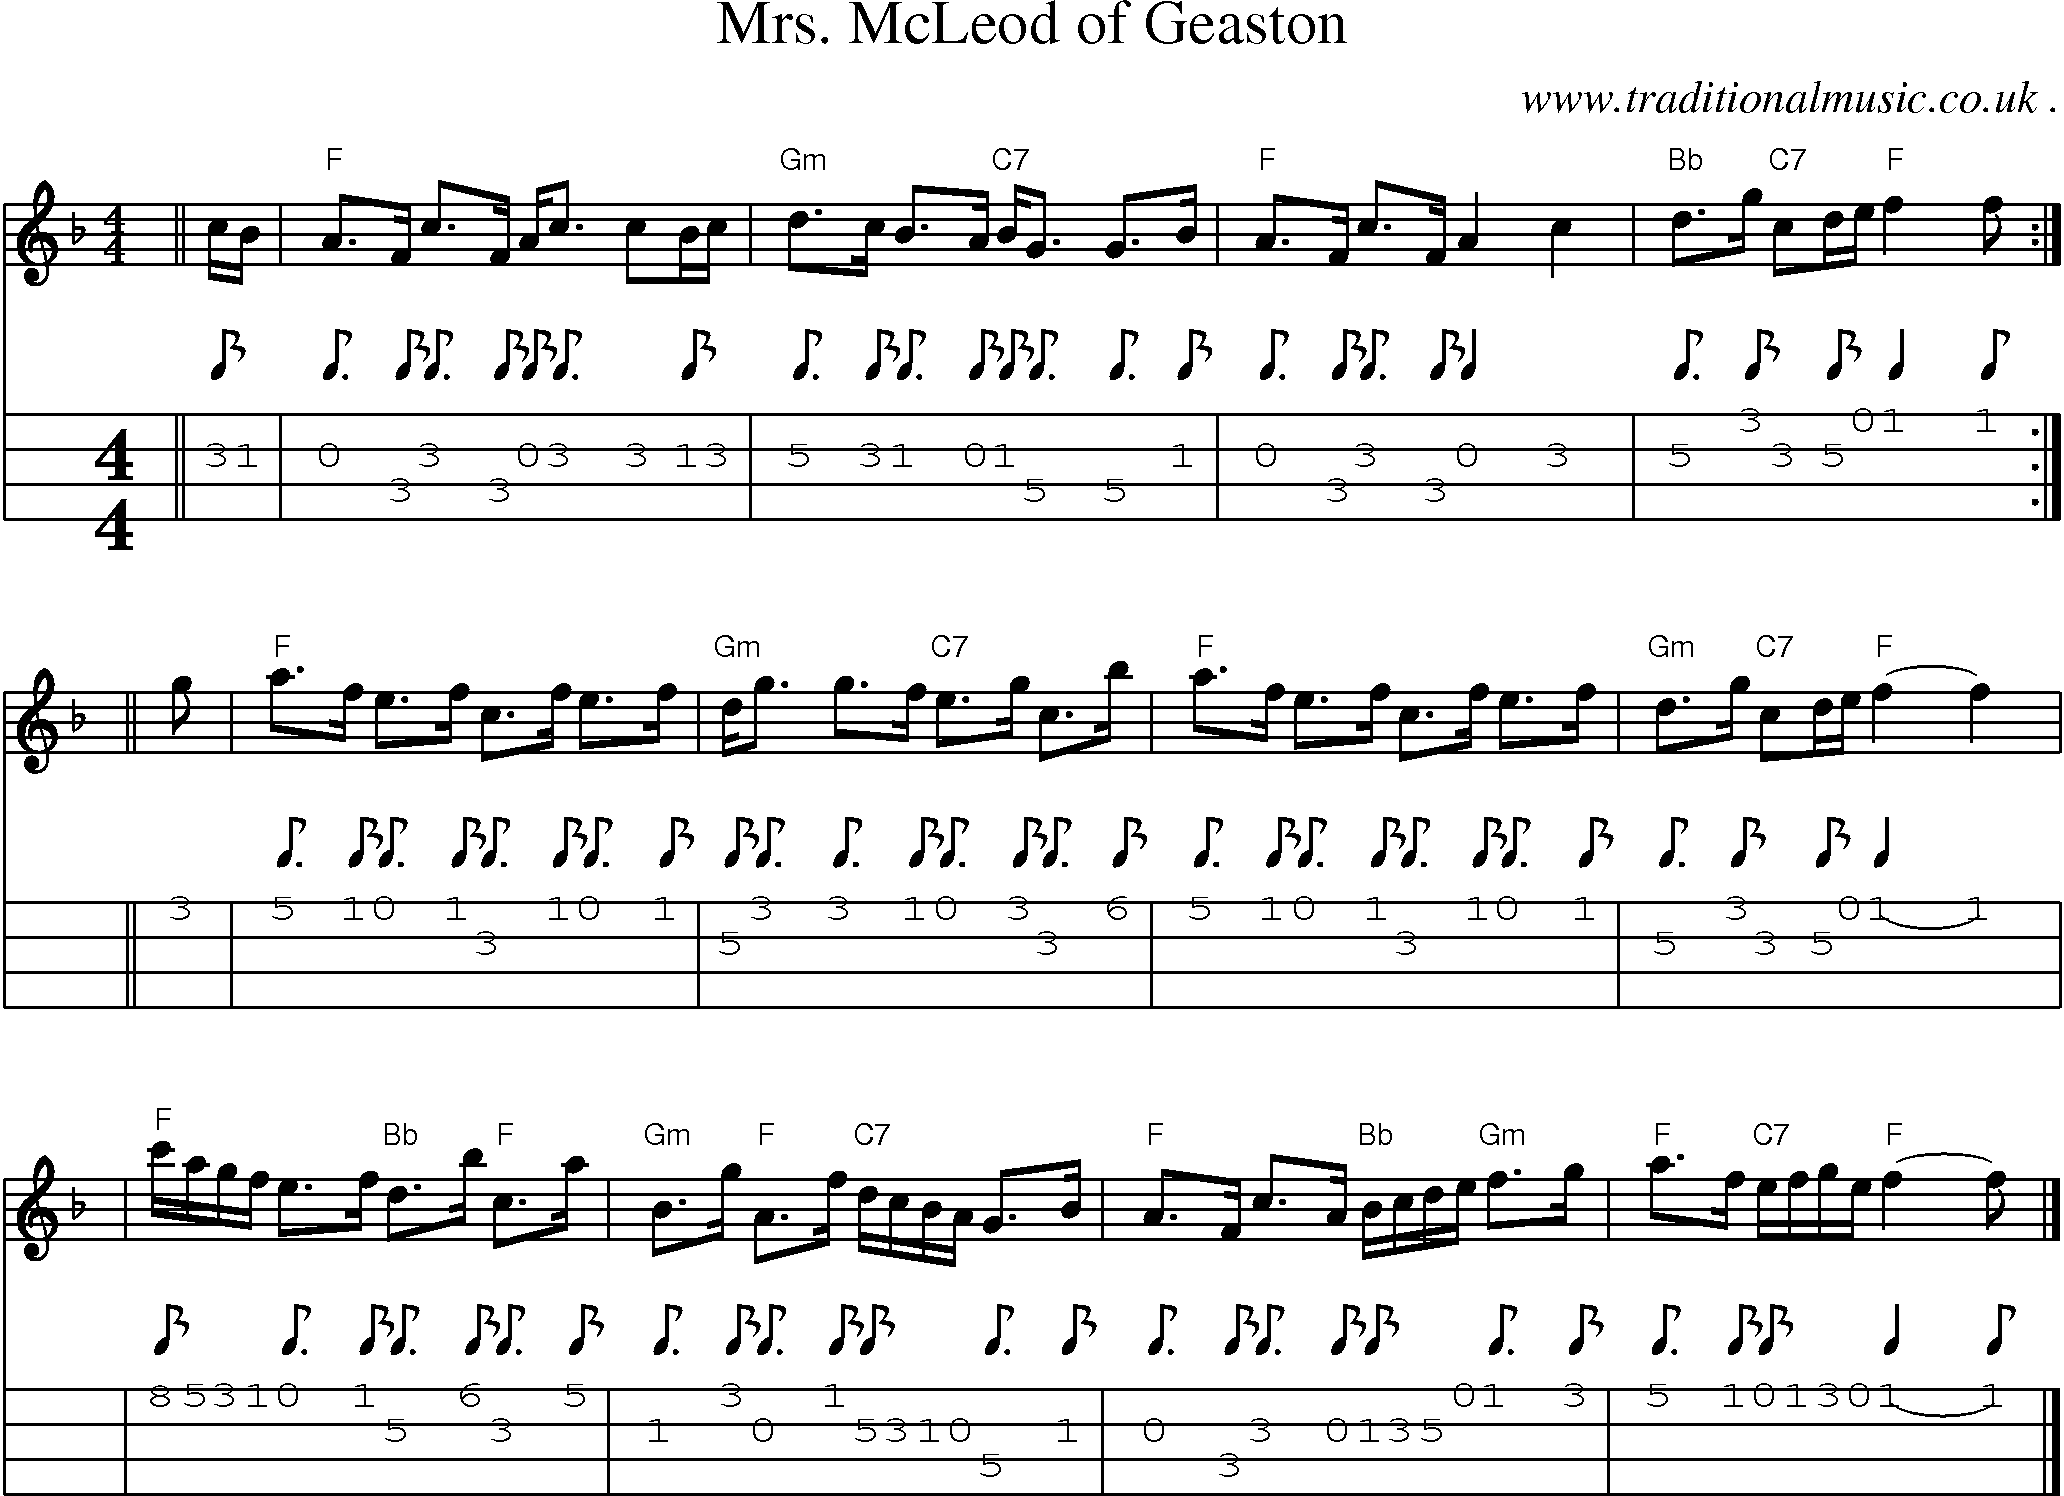 Sheet-music  score, Chords and Mandolin Tabs for Mrs Mcleod Of Geaston